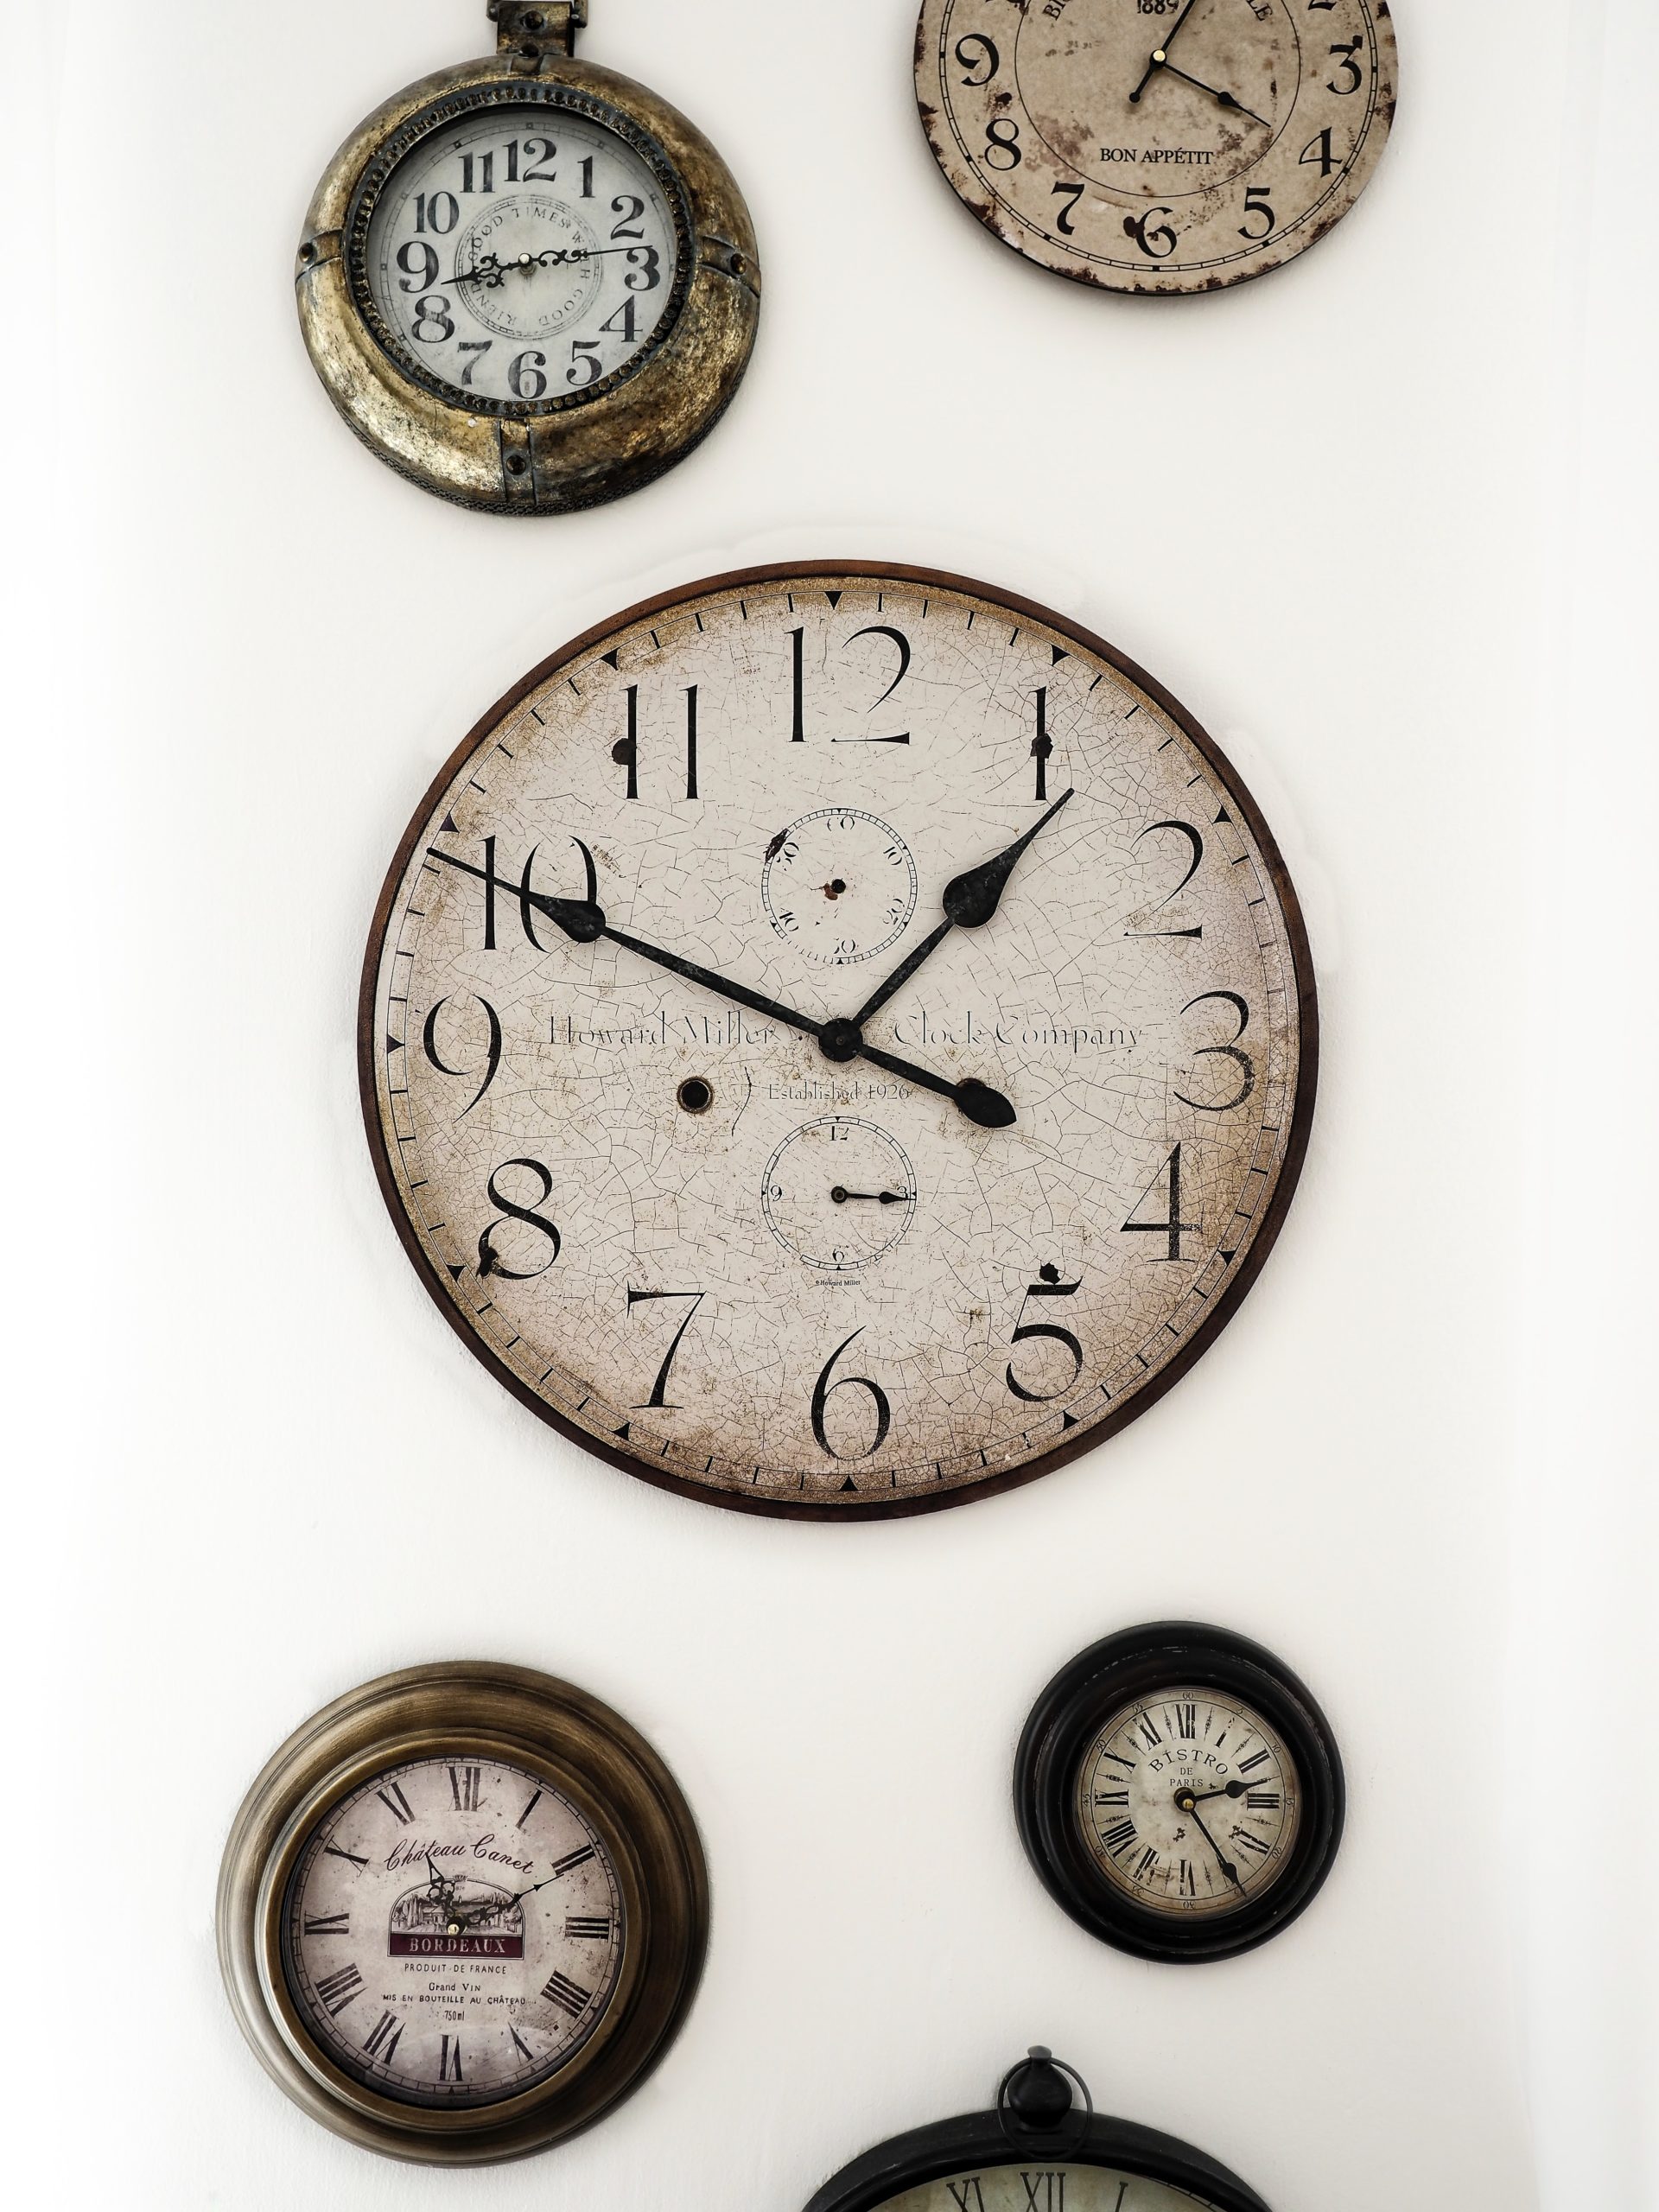 If you want to be successful while building a business, you need to learn the key to time management, which is why this photo shows many clocks perched on a wall.